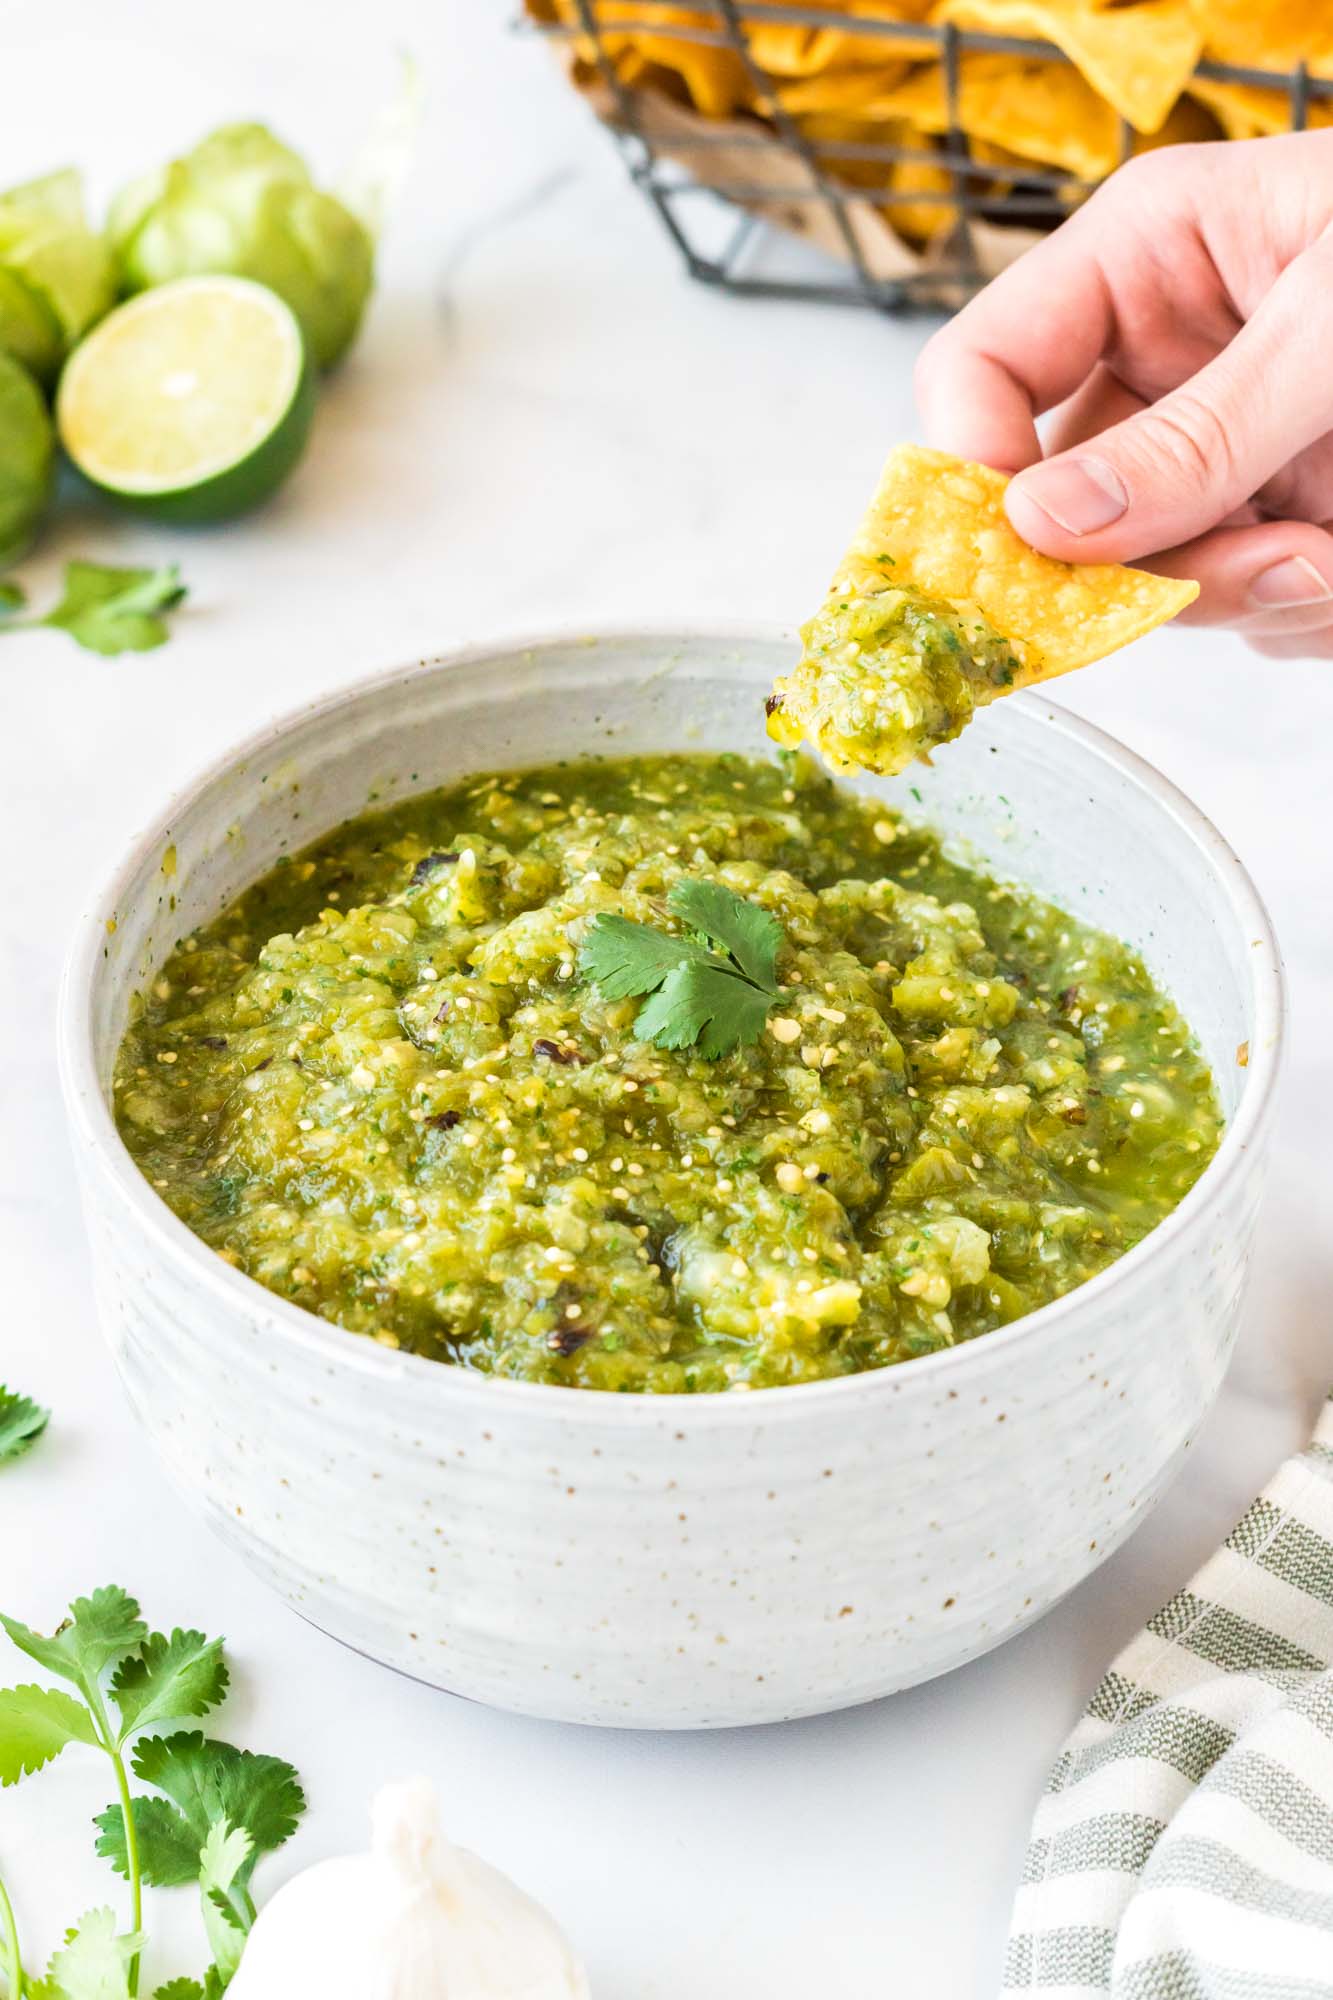 Dipping a chip in salsa verde